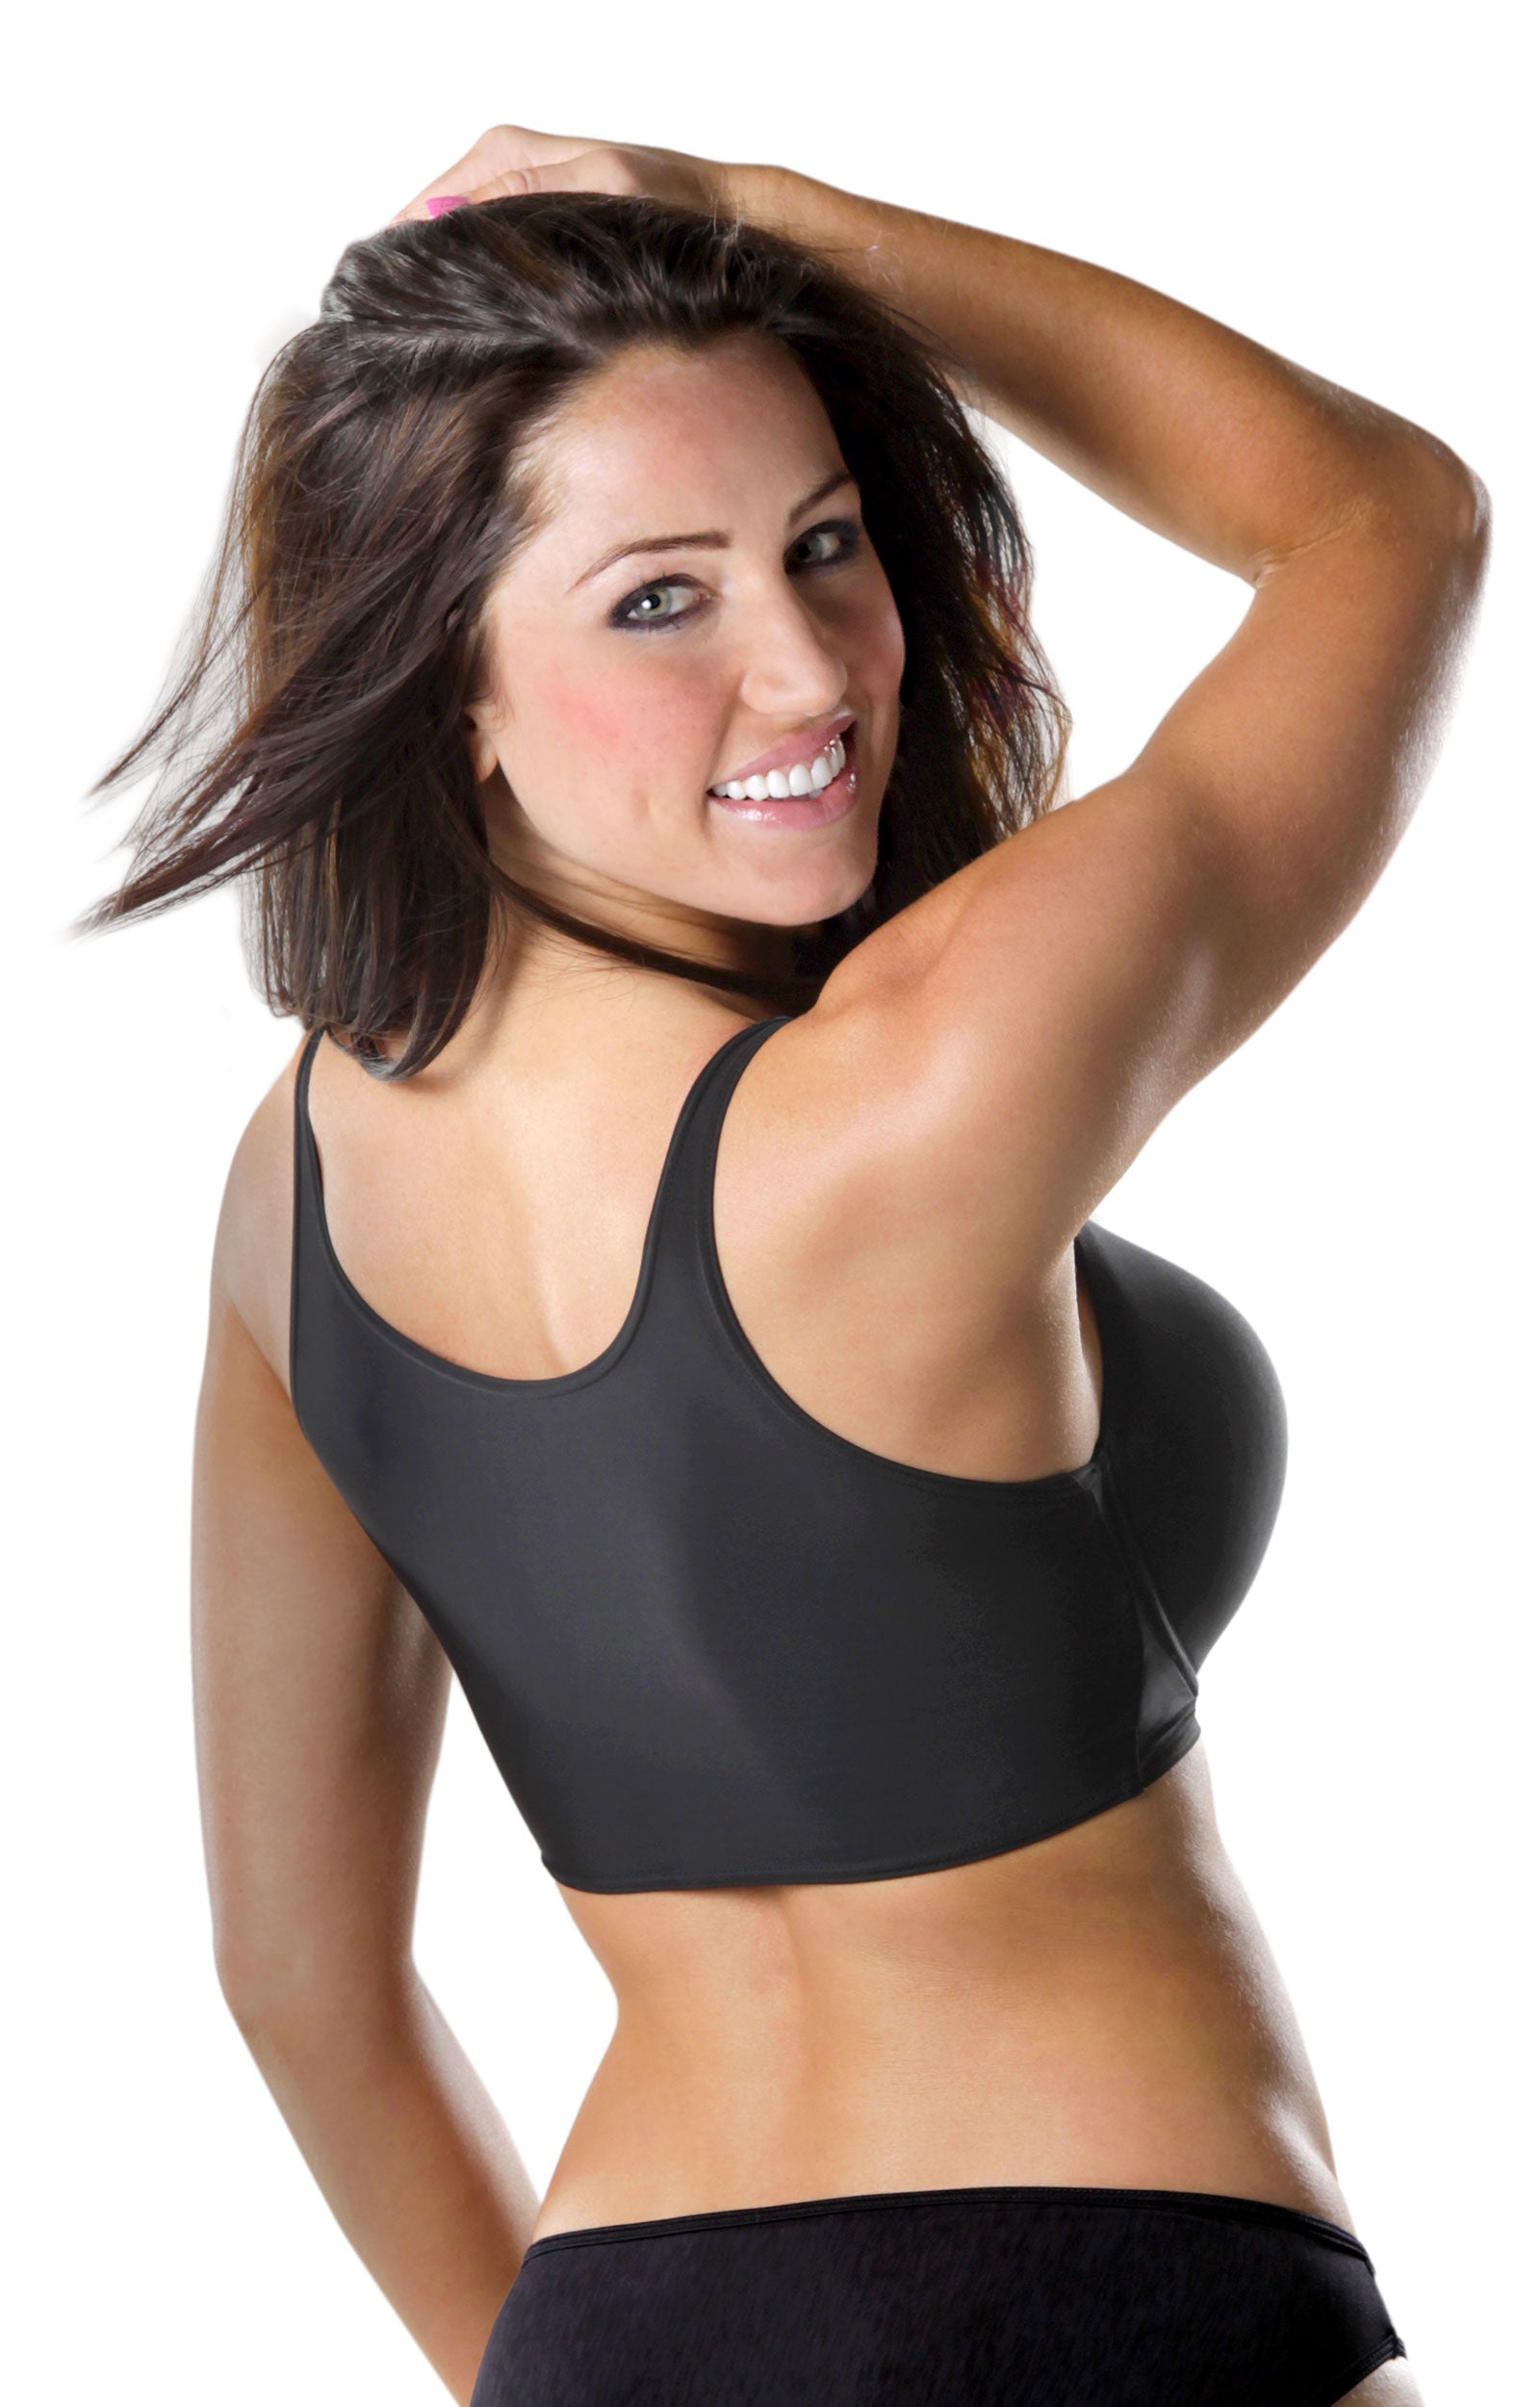 The Original Tankee Short Back-Smoothing Ultra Comfortable Tee-Shirt Bra  Virtually Invisible Under Knit Tops - Shapeez Canada